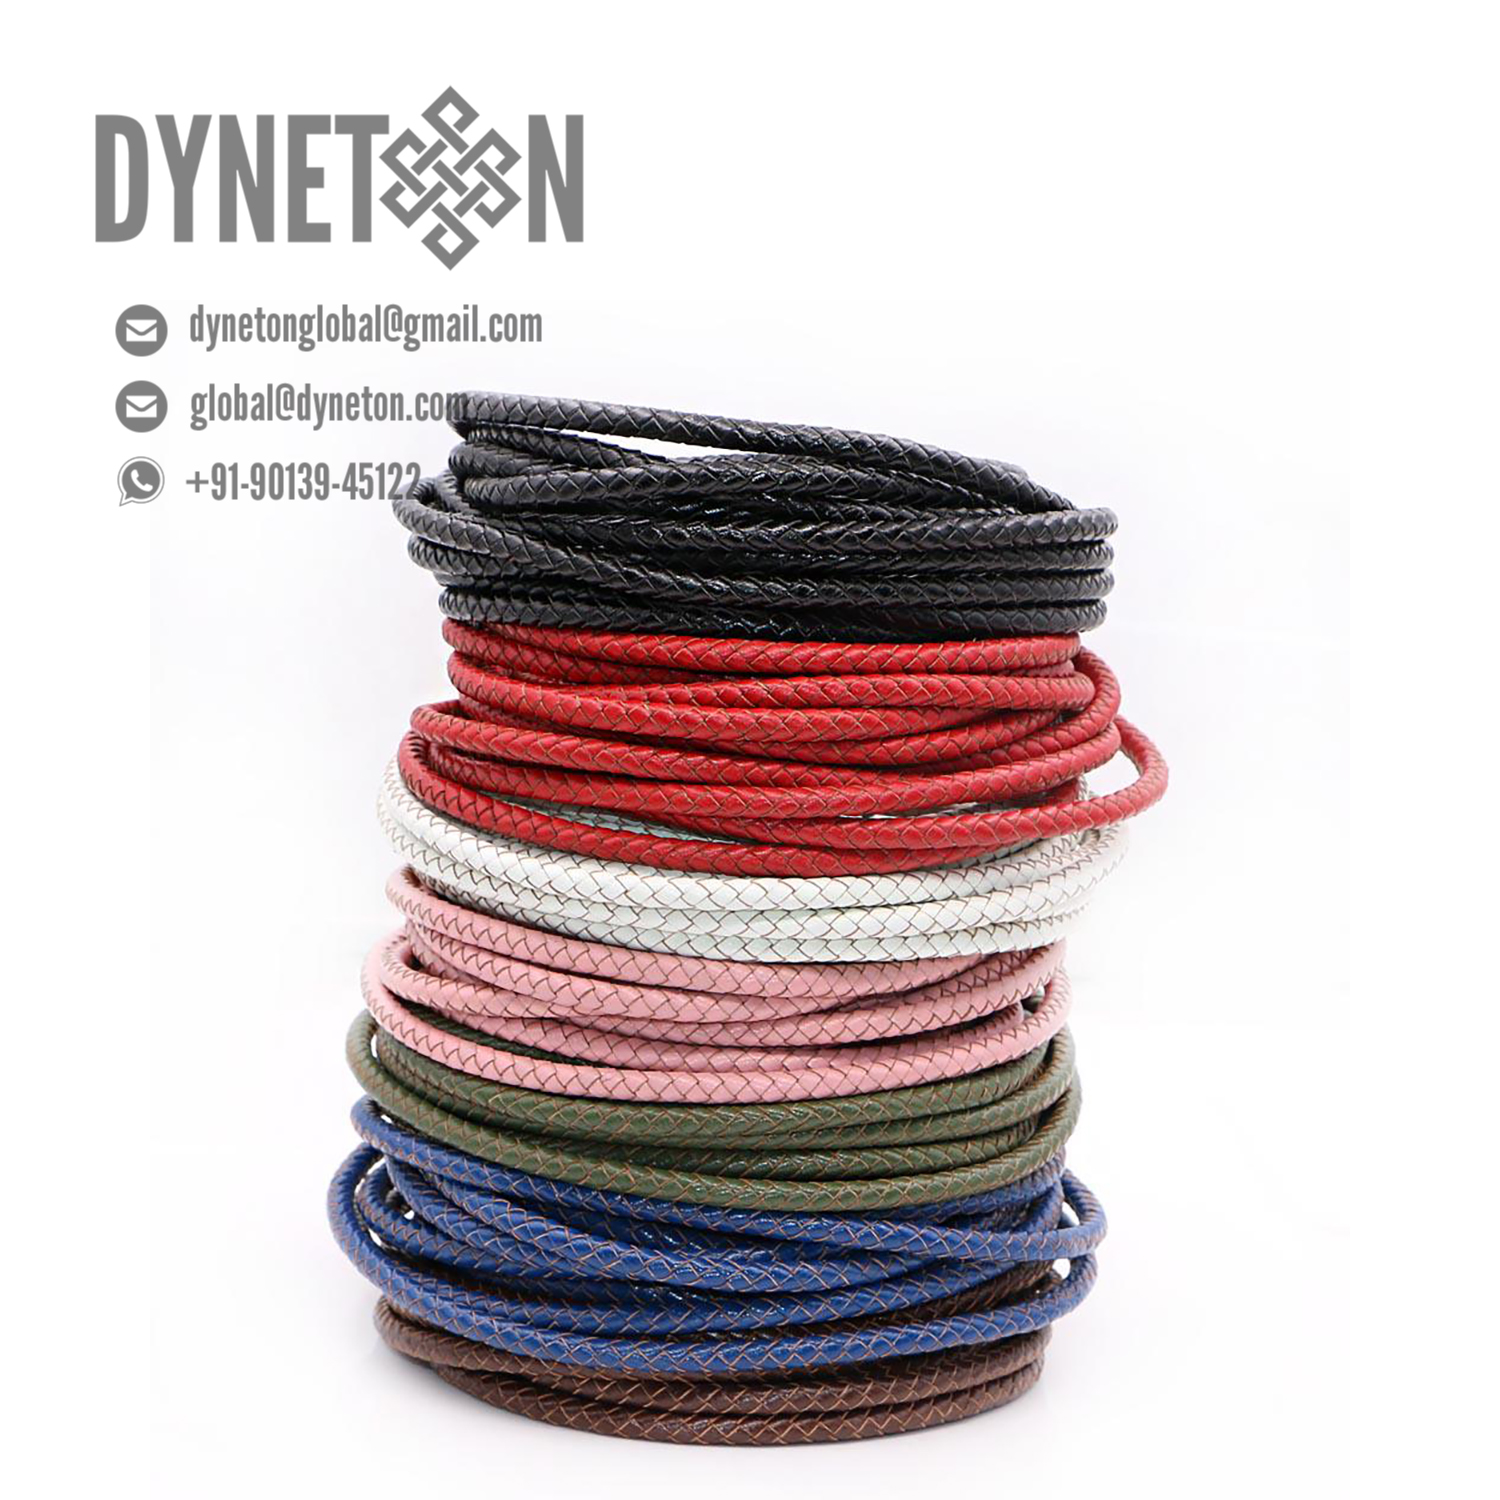 3mm Bolo Braided Leather Cord - DYNETON / Braided Leather Cords 3 mm